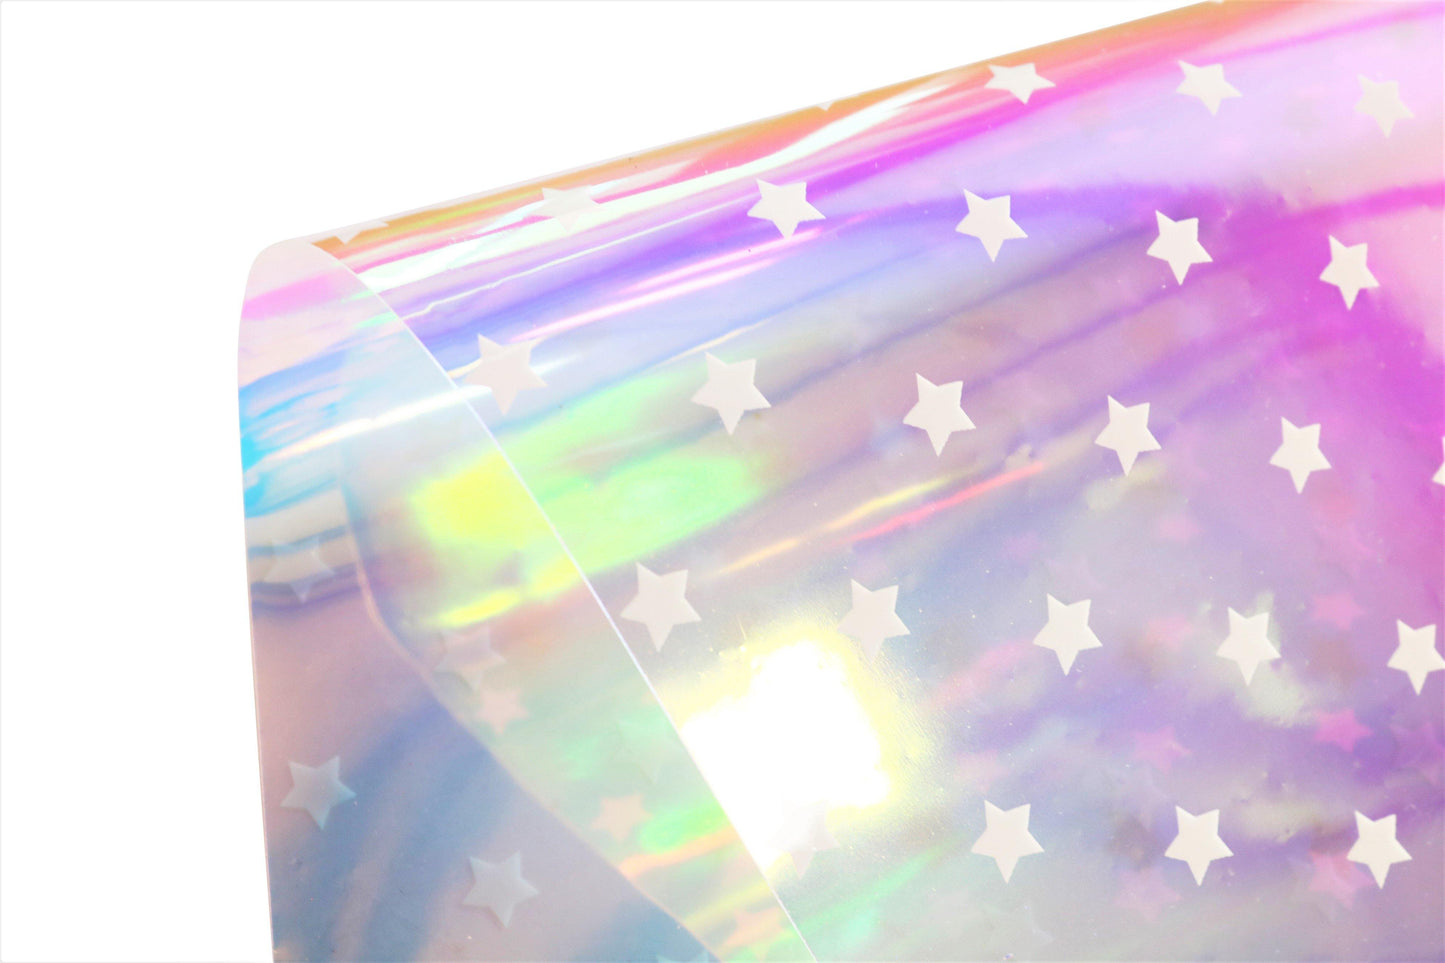 Holographic Ombre Jelly Sheets - Pretty in Pink Supply